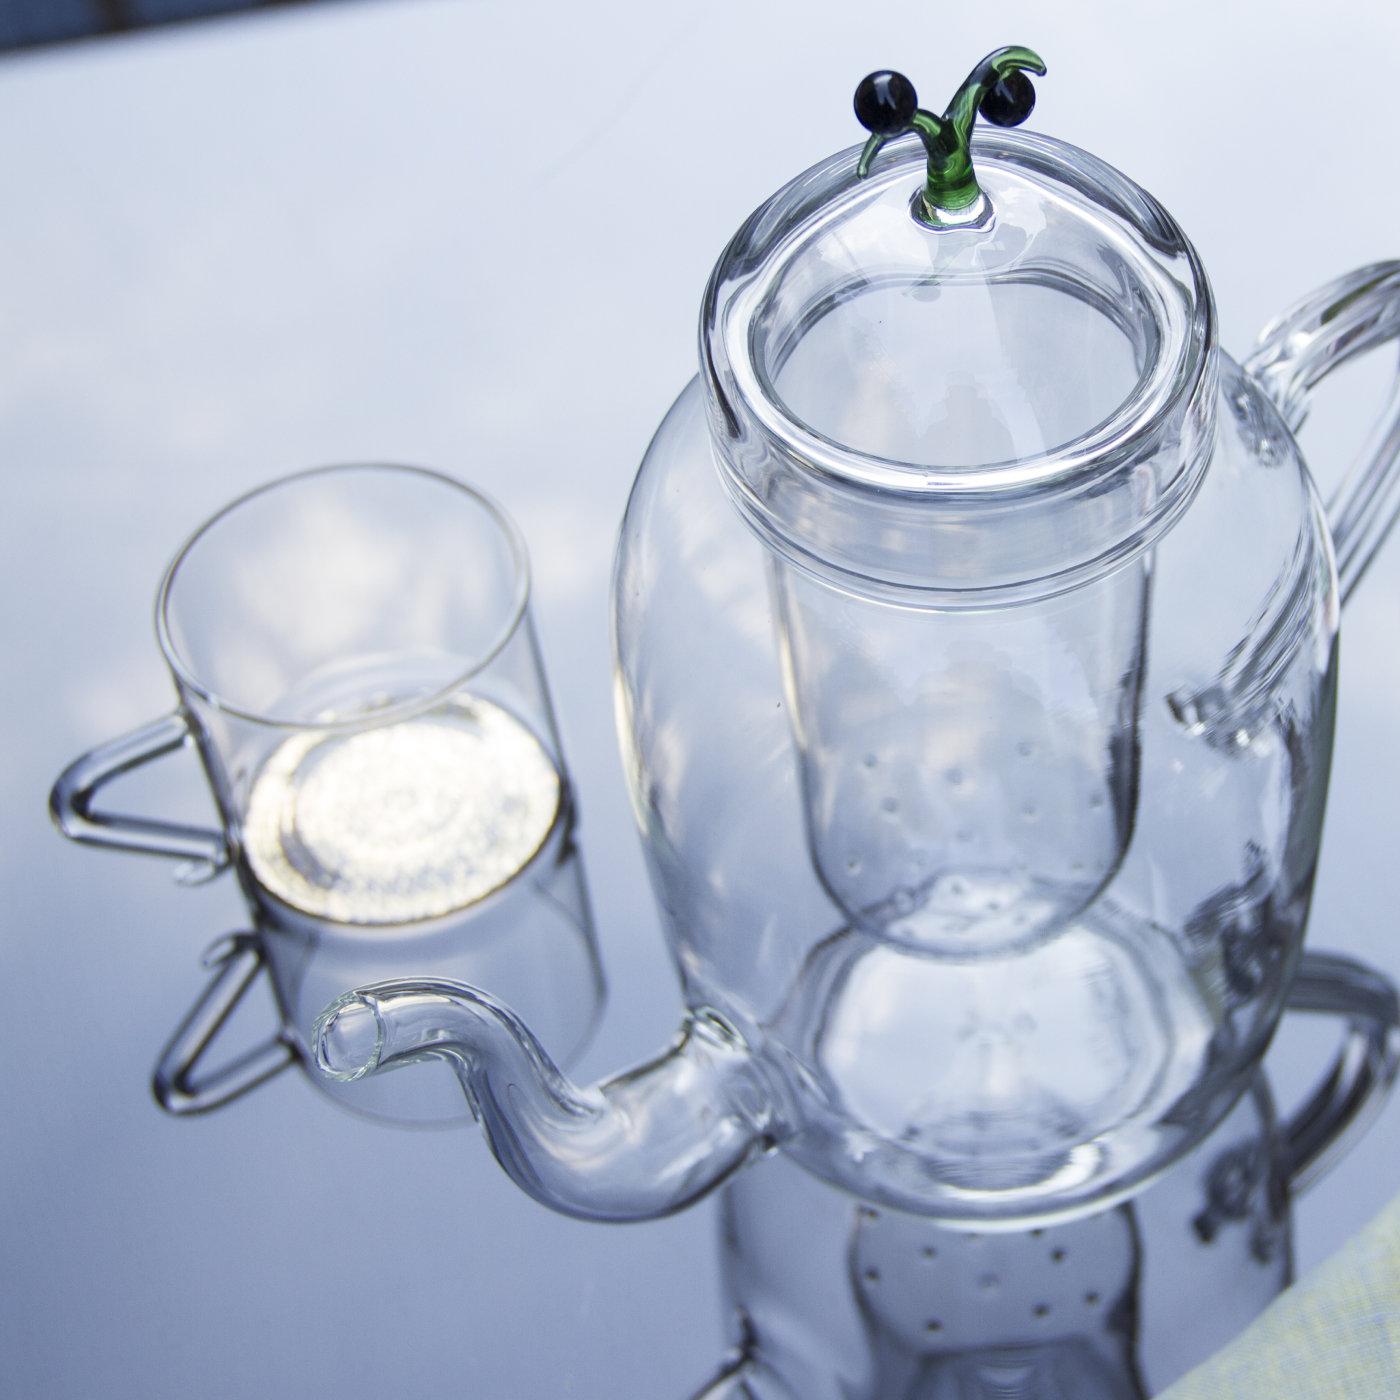 Ethereal and playful, this teapot is entirely handcrafted of transparent mouth-blown glass in a curvaceous silhouette that is elegant and timeless. The piece comprises the main bowl (with spout and handle), the filter (that rests inside the mouth of